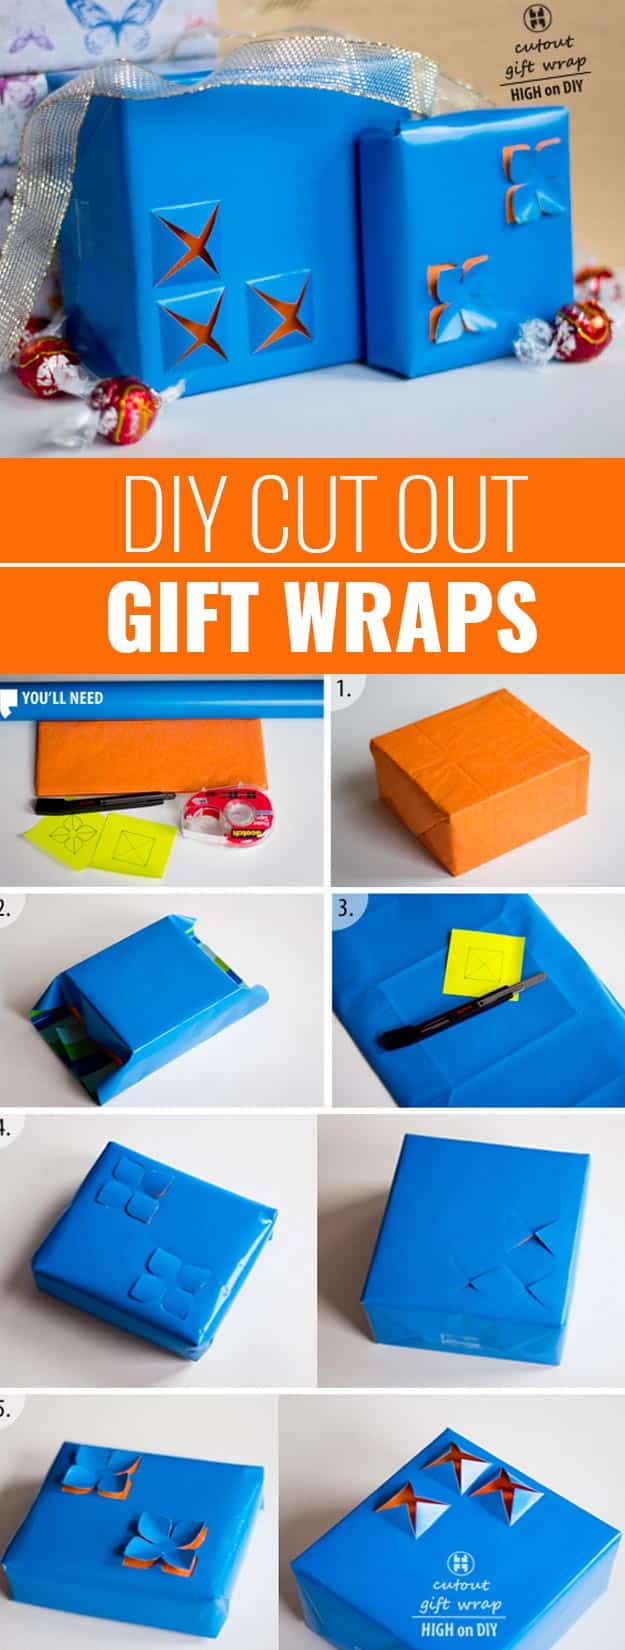 DIY Gift Wrapping Ideas - How To Wrap A Present - Tutorials, Cool Ideas and Instructions | Cute Gift Wrap Ideas for Christmas, Birthdays and Holidays | Tips for Bows and Creative Wrapping Papers | Cut-Out-Gift-Wraps #gifts #diys